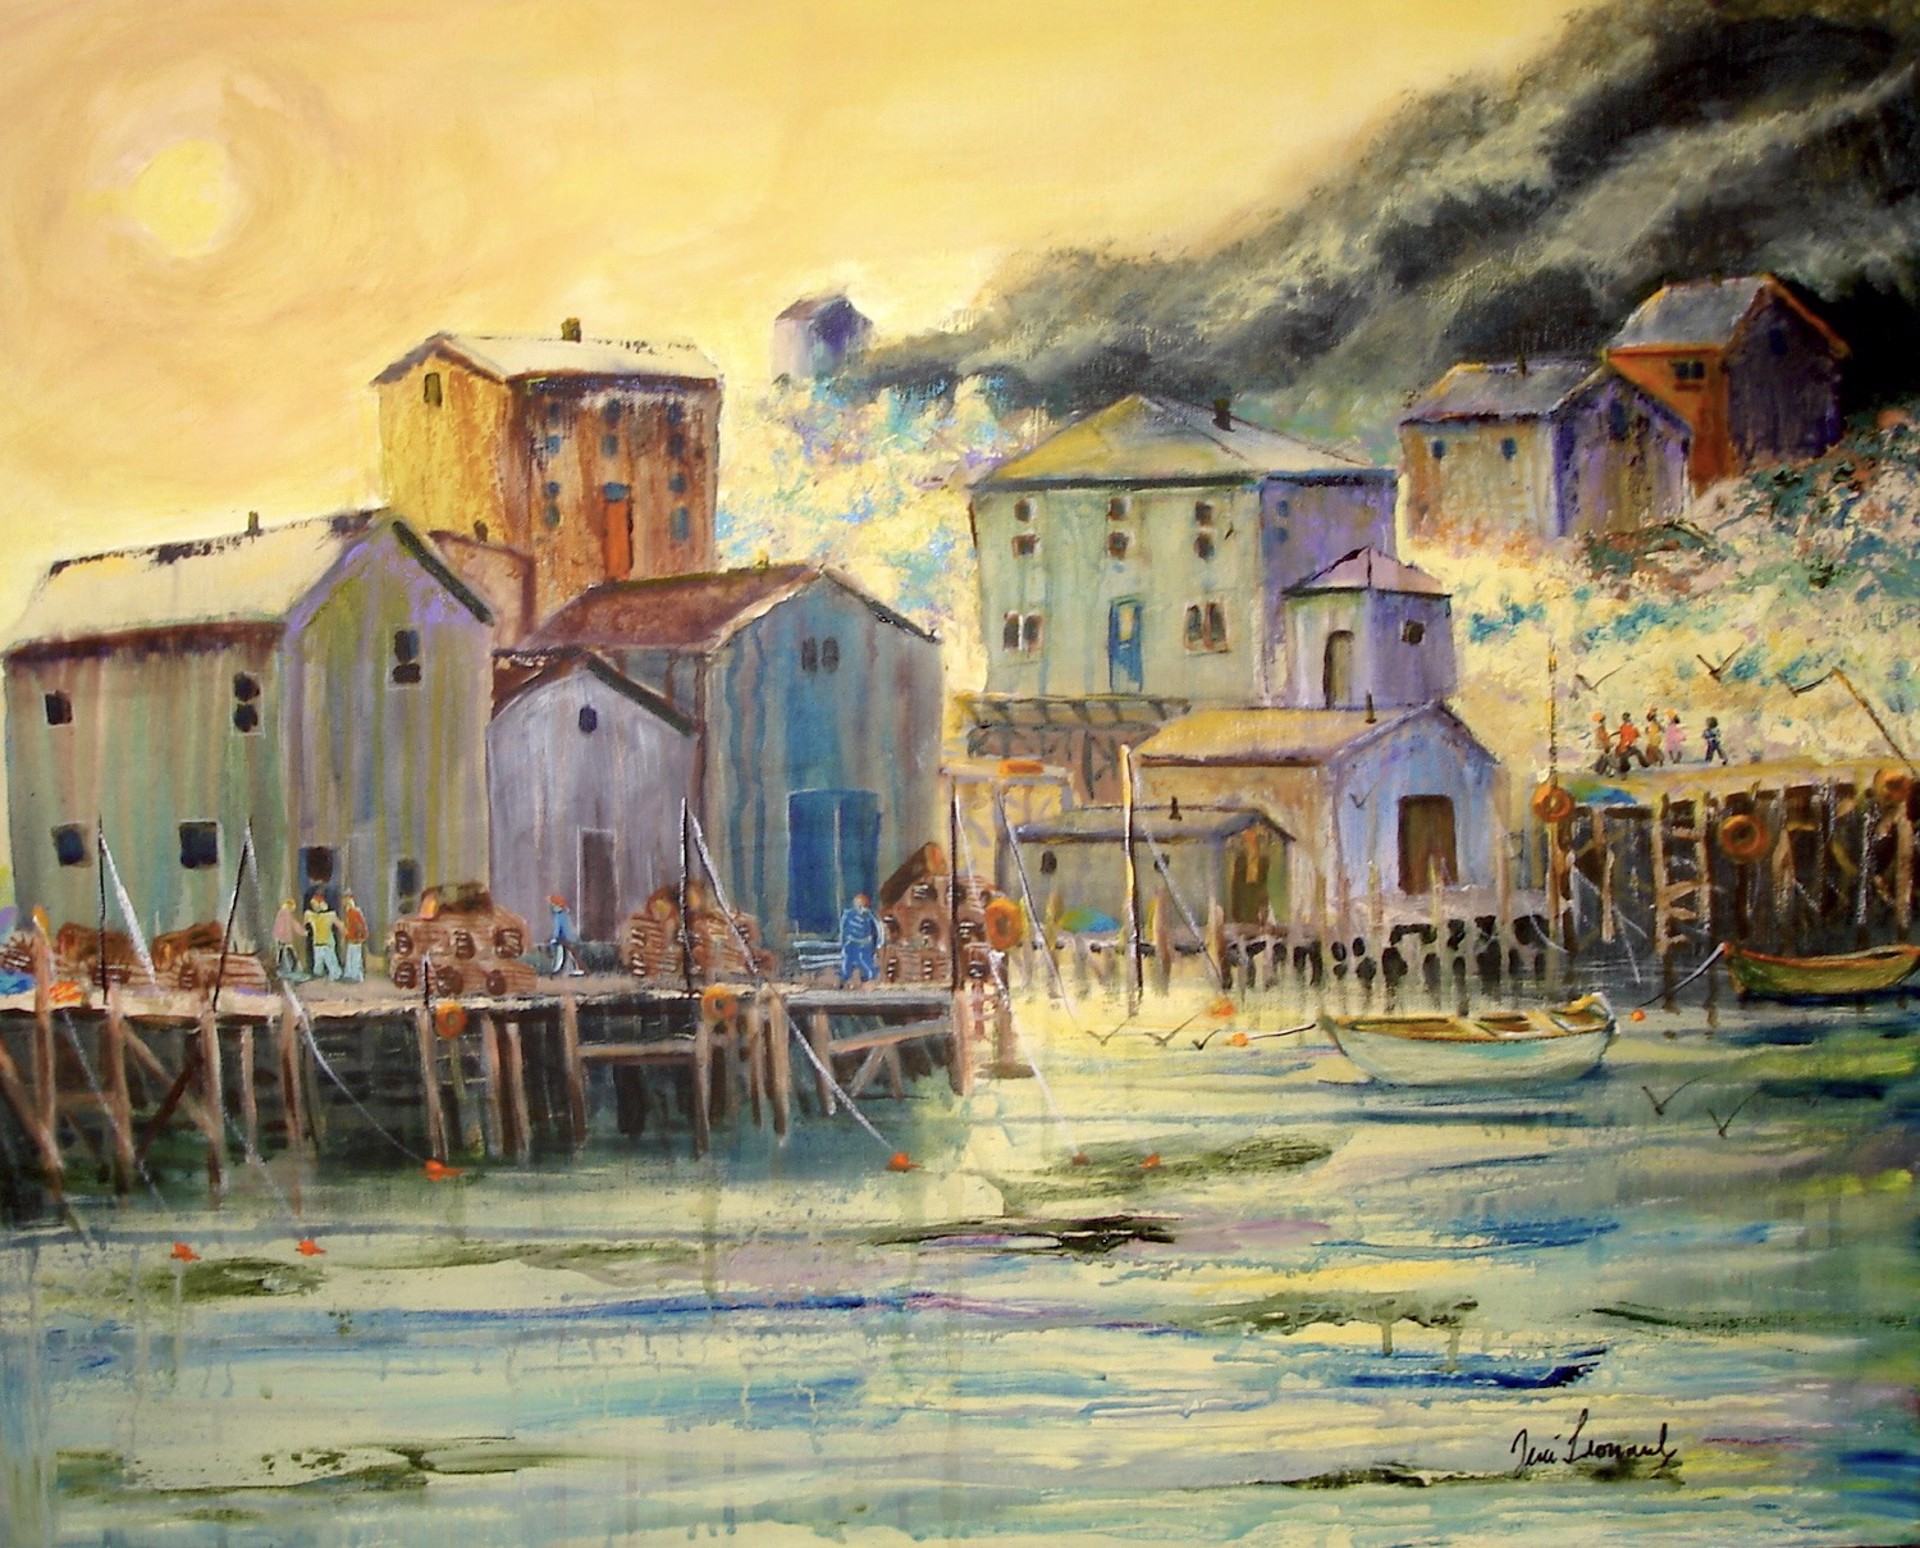 Morning Light in the Harbour, Harbour Le Cou by Terri Leonard